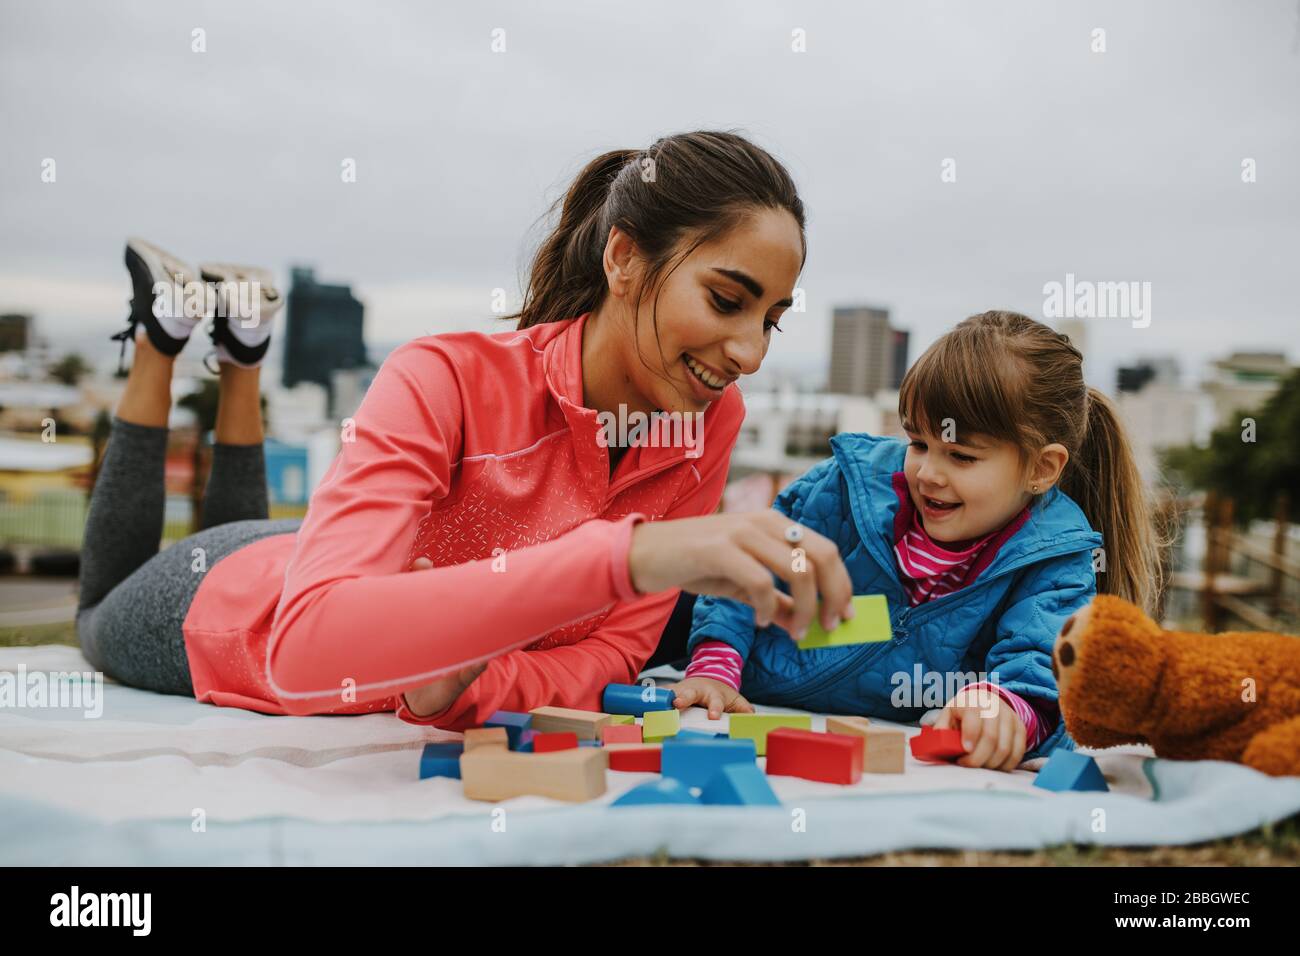 Woman playing building blocks with a small girl at the park. Girl child and her nanny lying on the blanket and playing wooden blocks at the park. Stock Photo